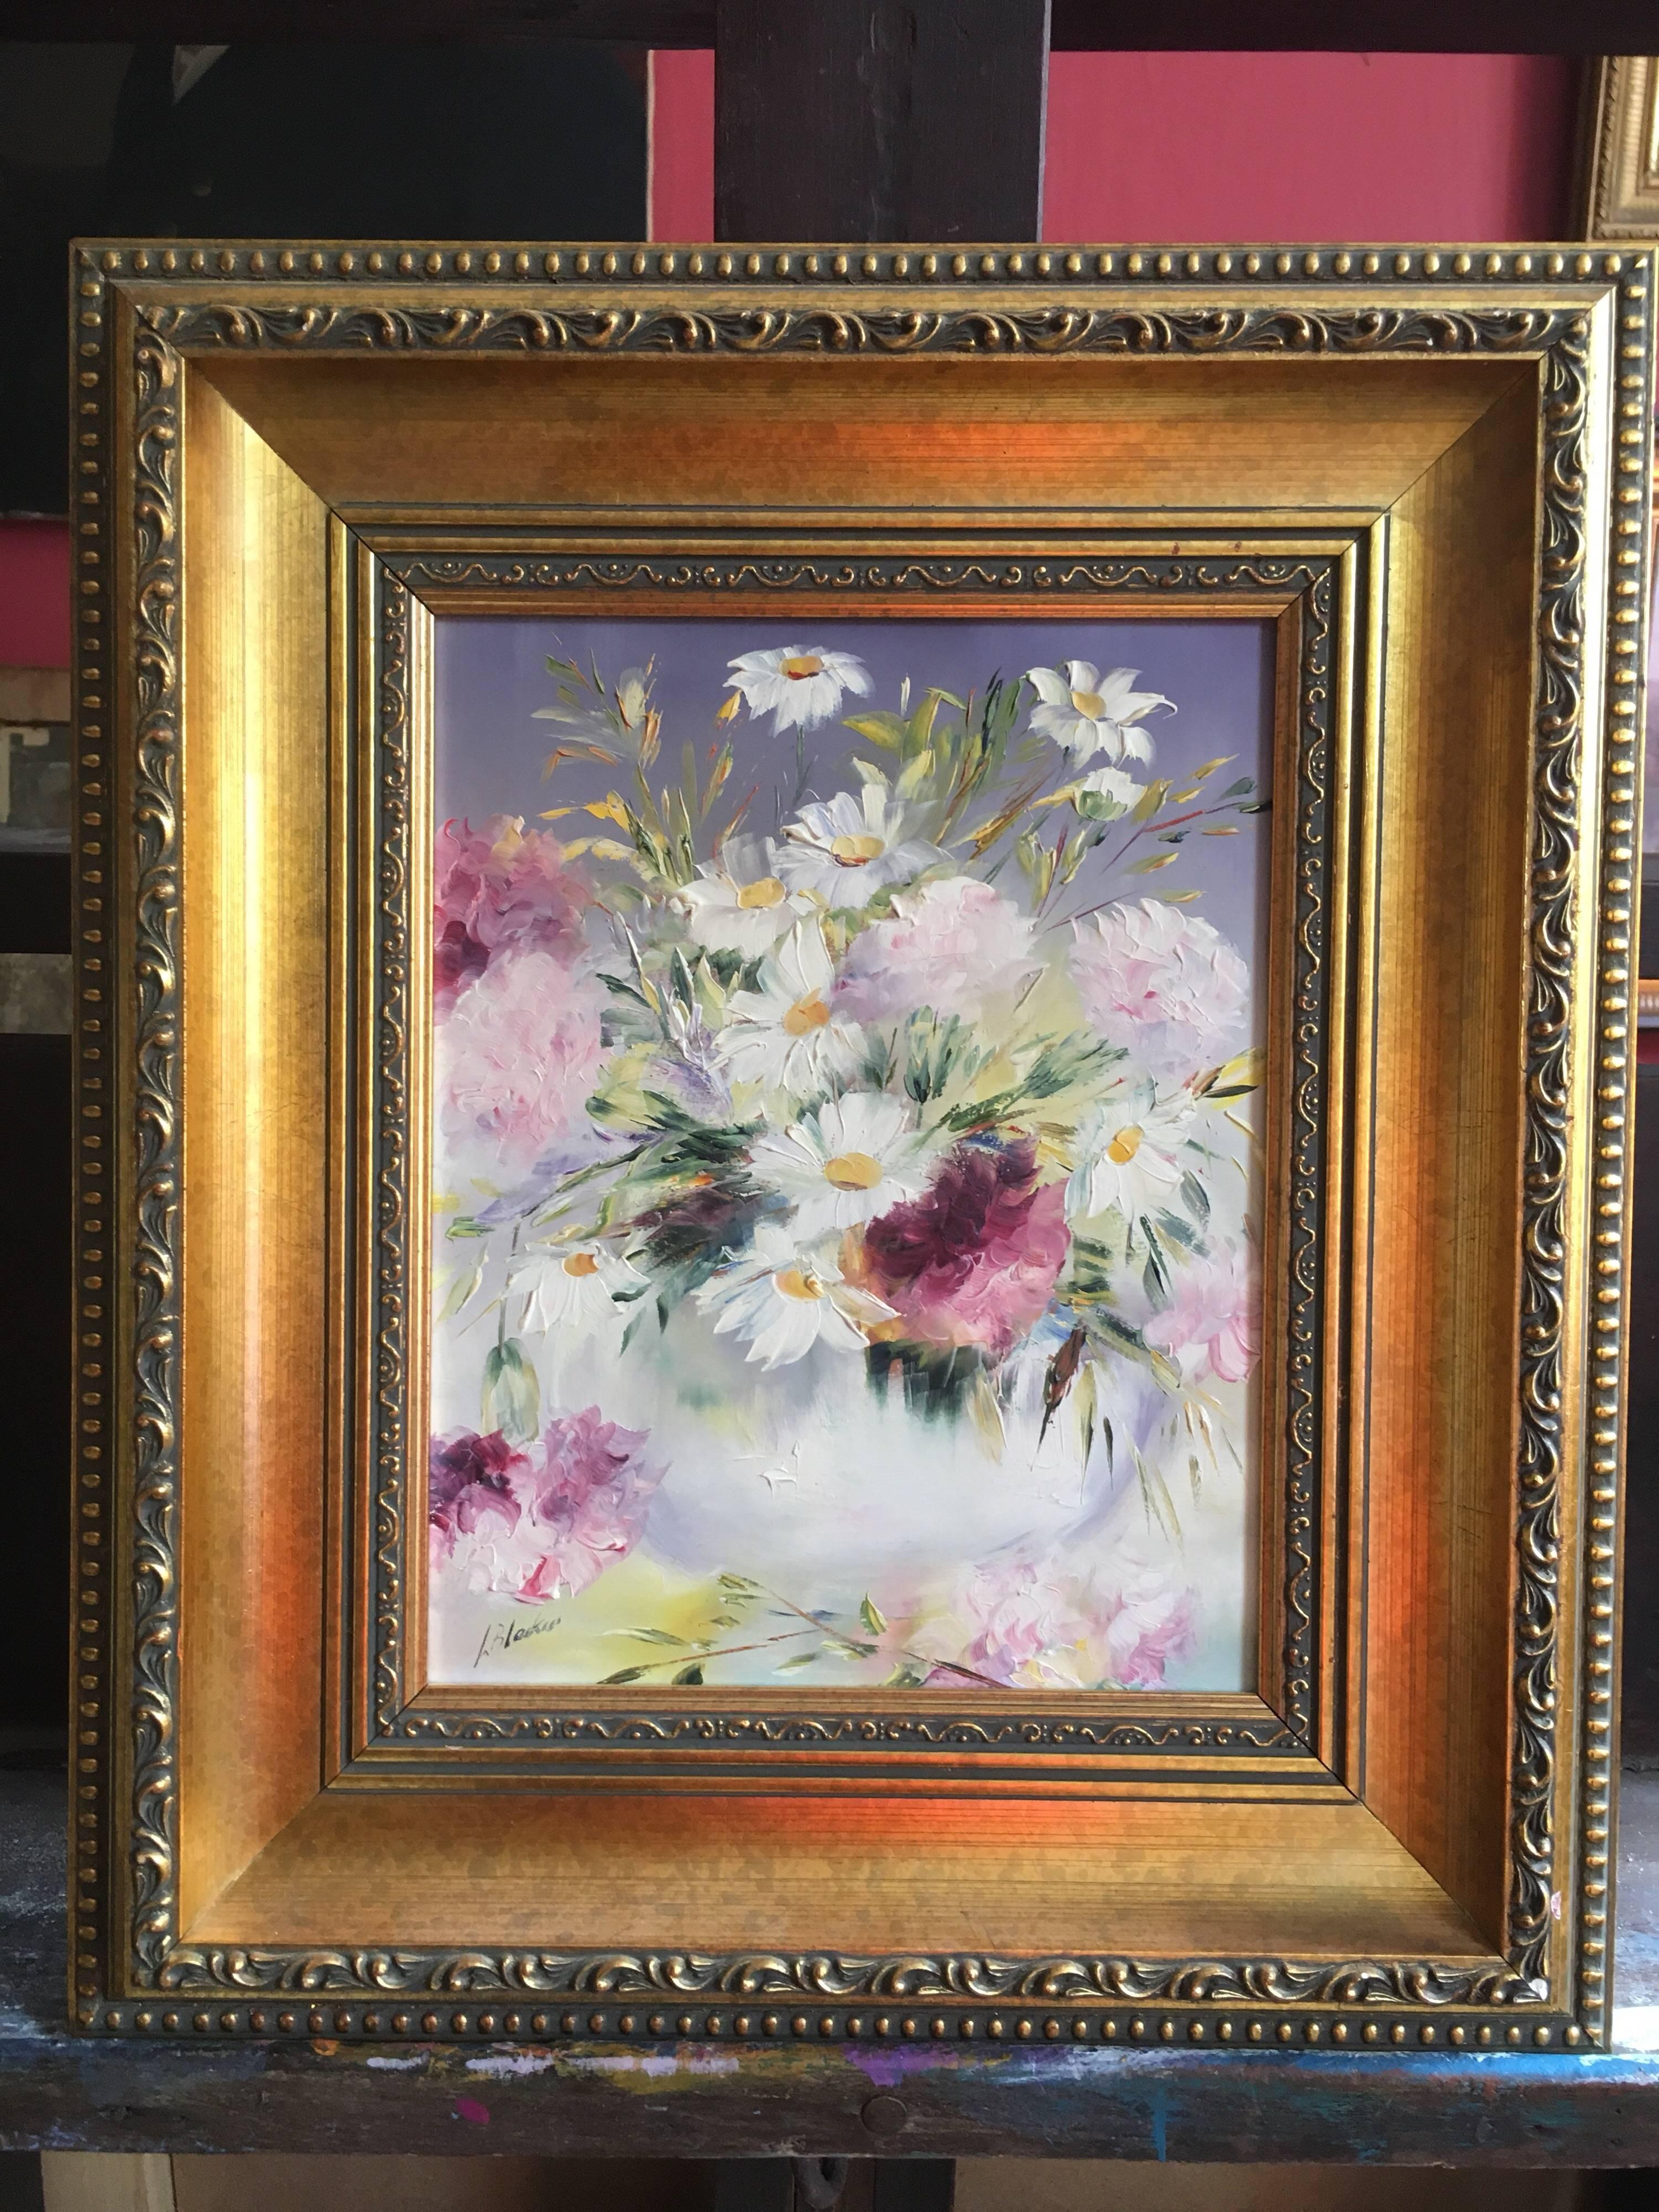 Wild Daisy Floral Arrangement
By Lillias Blackie, Scottish Artist, 20th Century
Signed by the artist on the left hand corner
Oil painting on board, framed
Framed size: 13.5 x 15.5 inches

Beautiful floral arrangement, one that looks like it has been